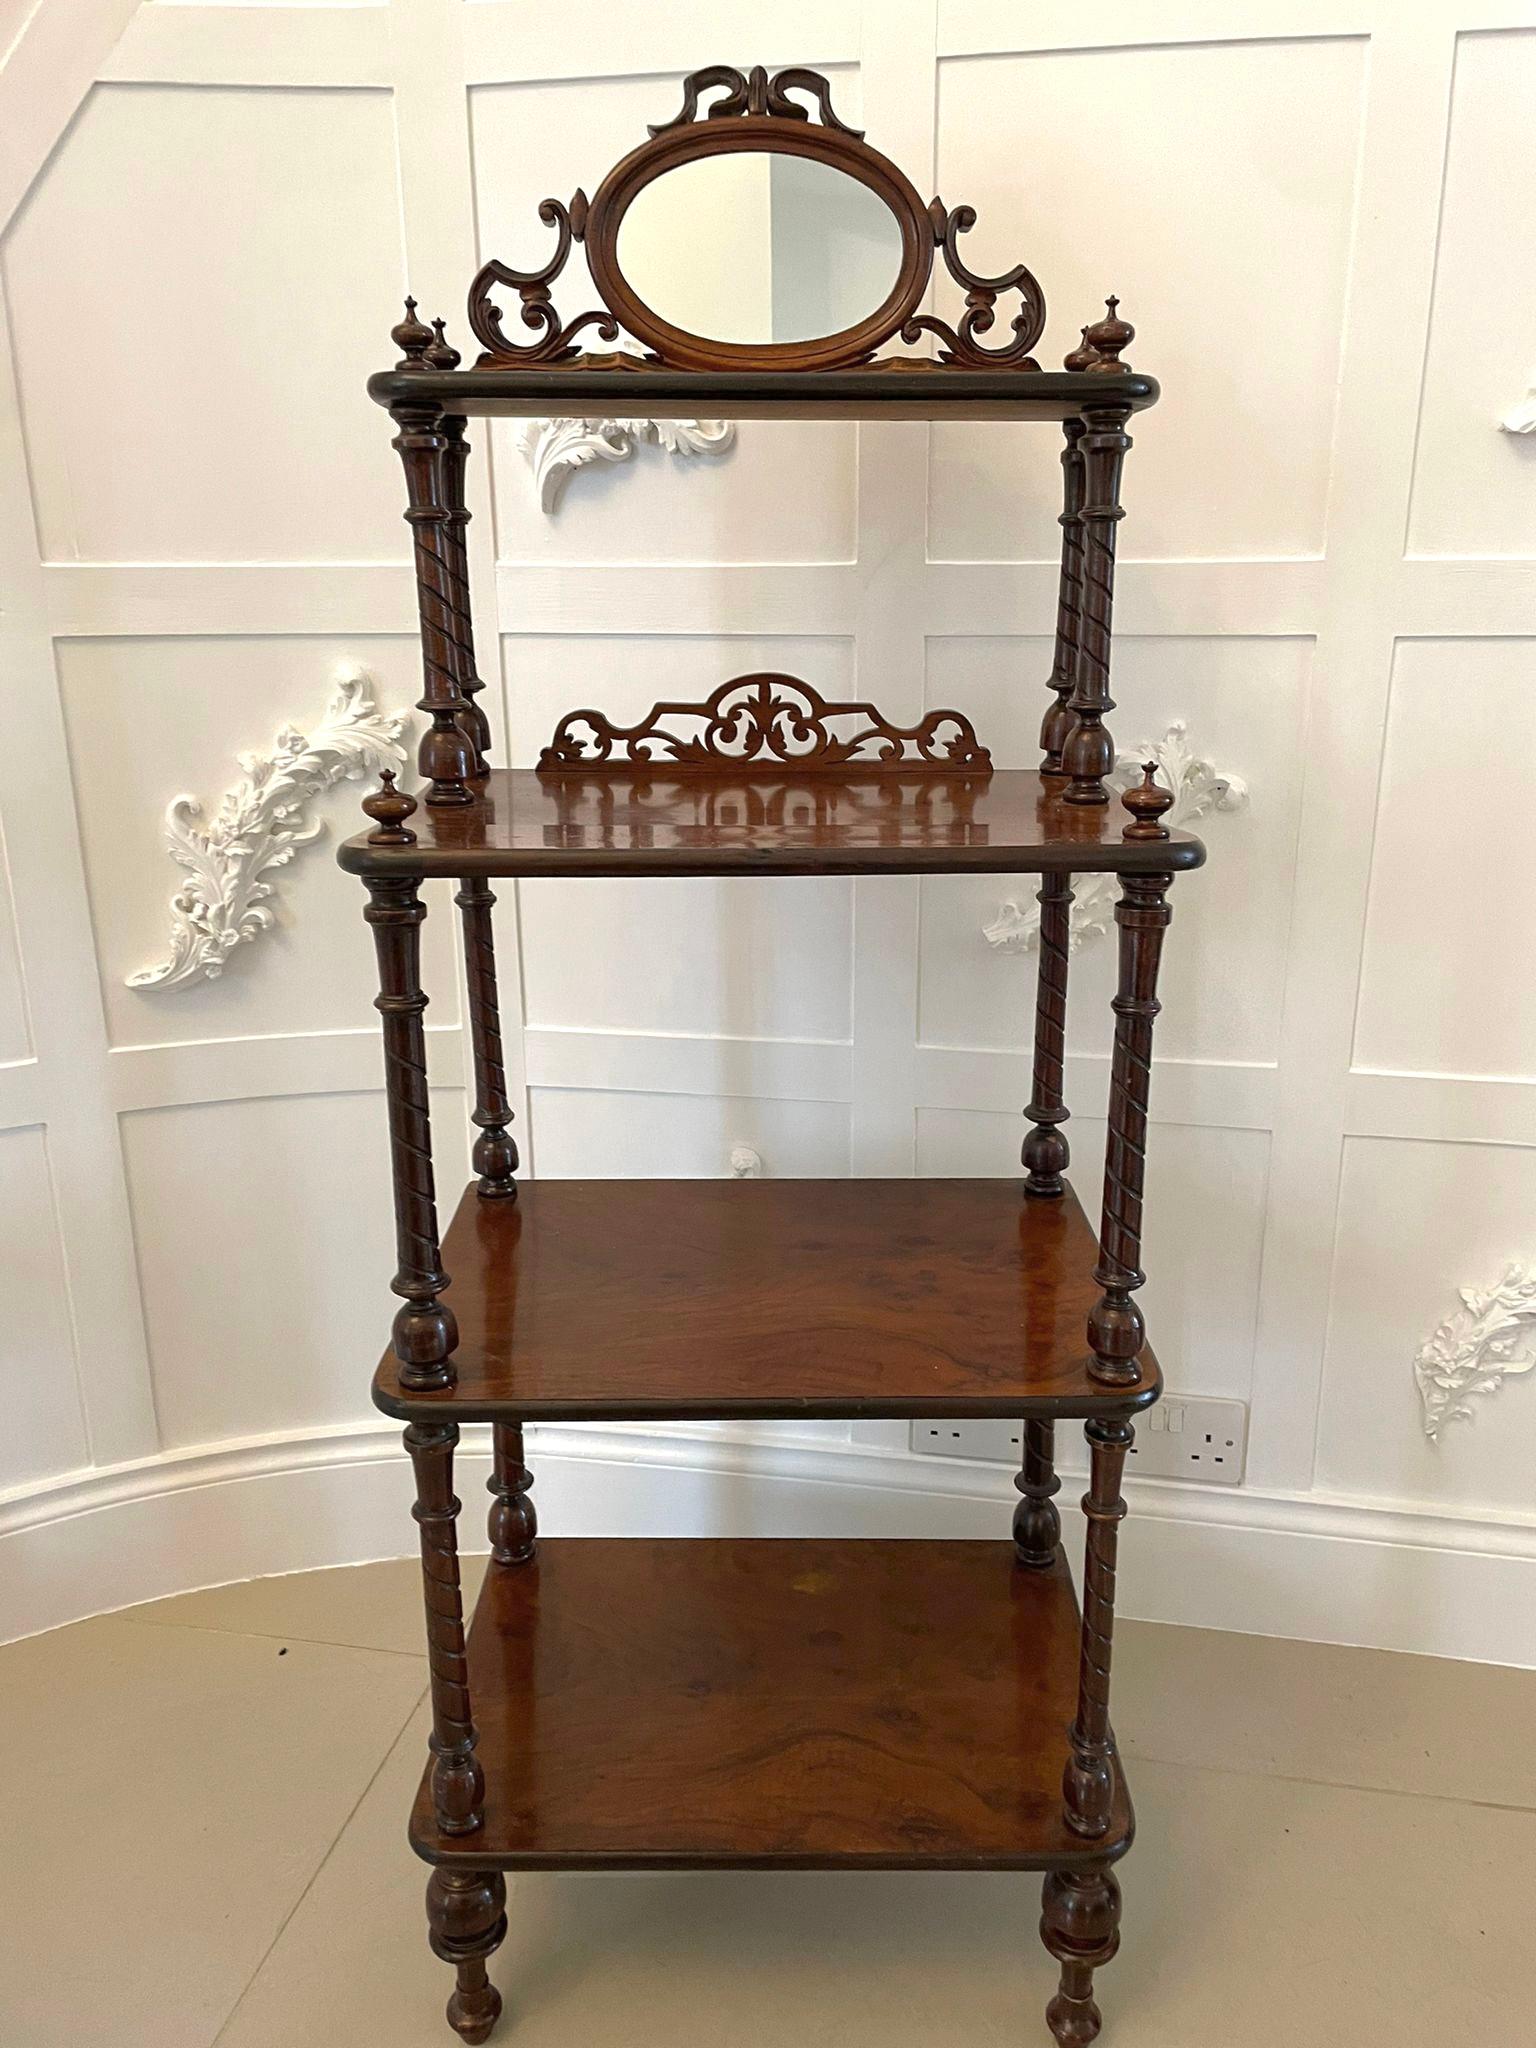 Antique Victorian burr walnut whatnot having a shaped oval mirror in a pierced walnut frame above four burr walnut shelves supported by twelve solid walnut turned reeded columns raised on four original turned legs

A beautifully crafted decorative